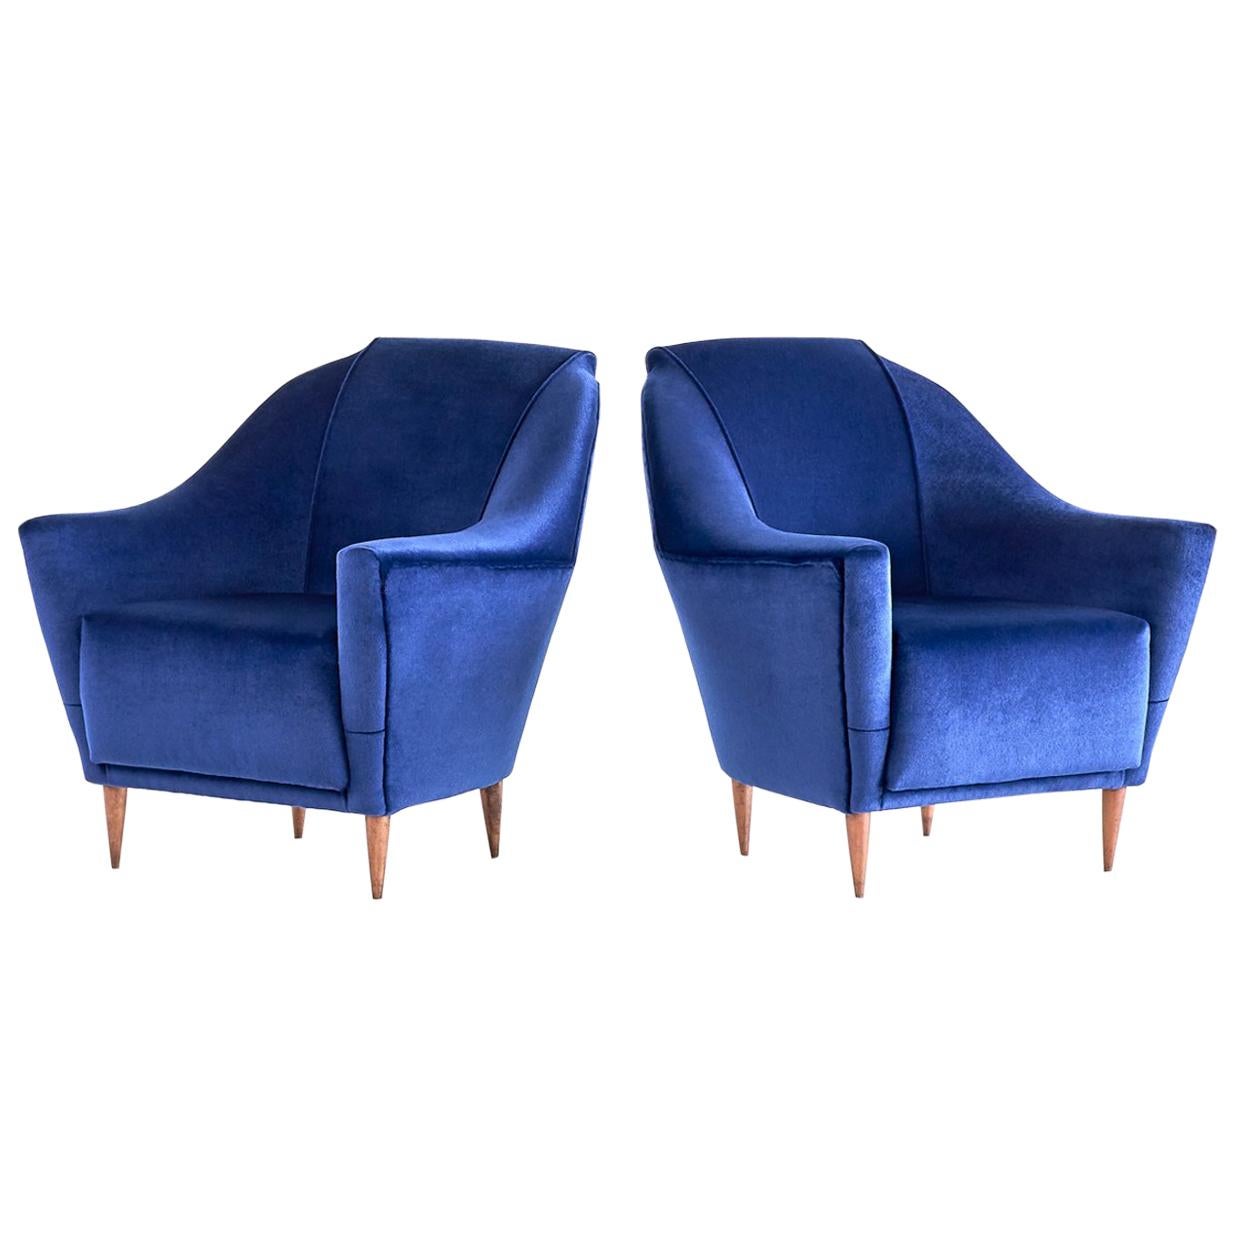 Pair of Ico Parisi Armchairs in Blue Velvet for Ariberto Colombo, Italy, 1951 For Sale